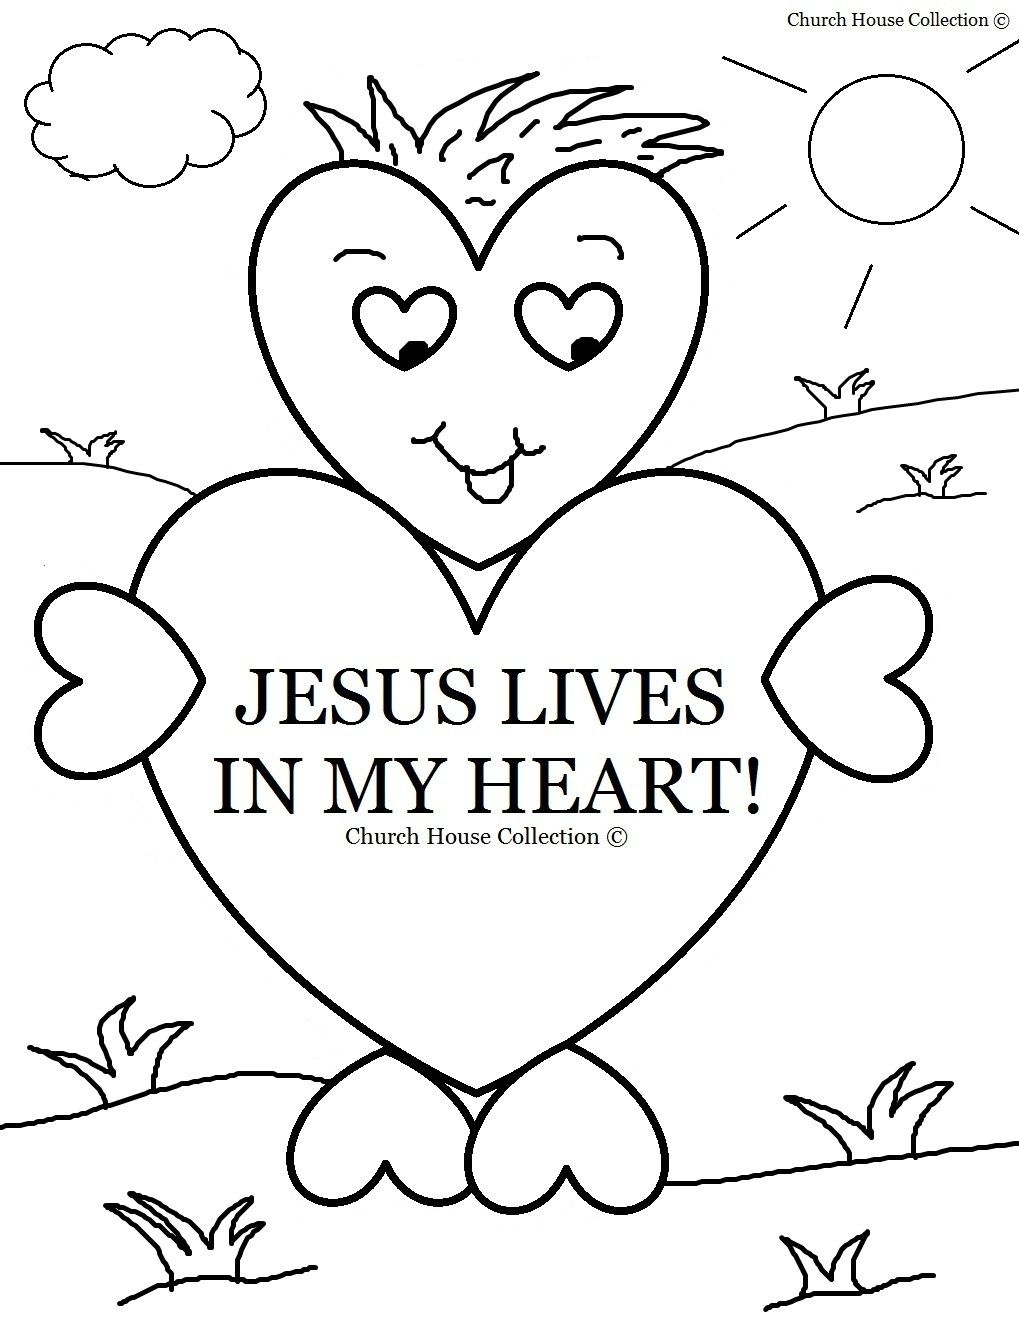 Coloring Book World ~ Free Sunday School Printables For Children - Free Printable Sunday School Coloring Sheets